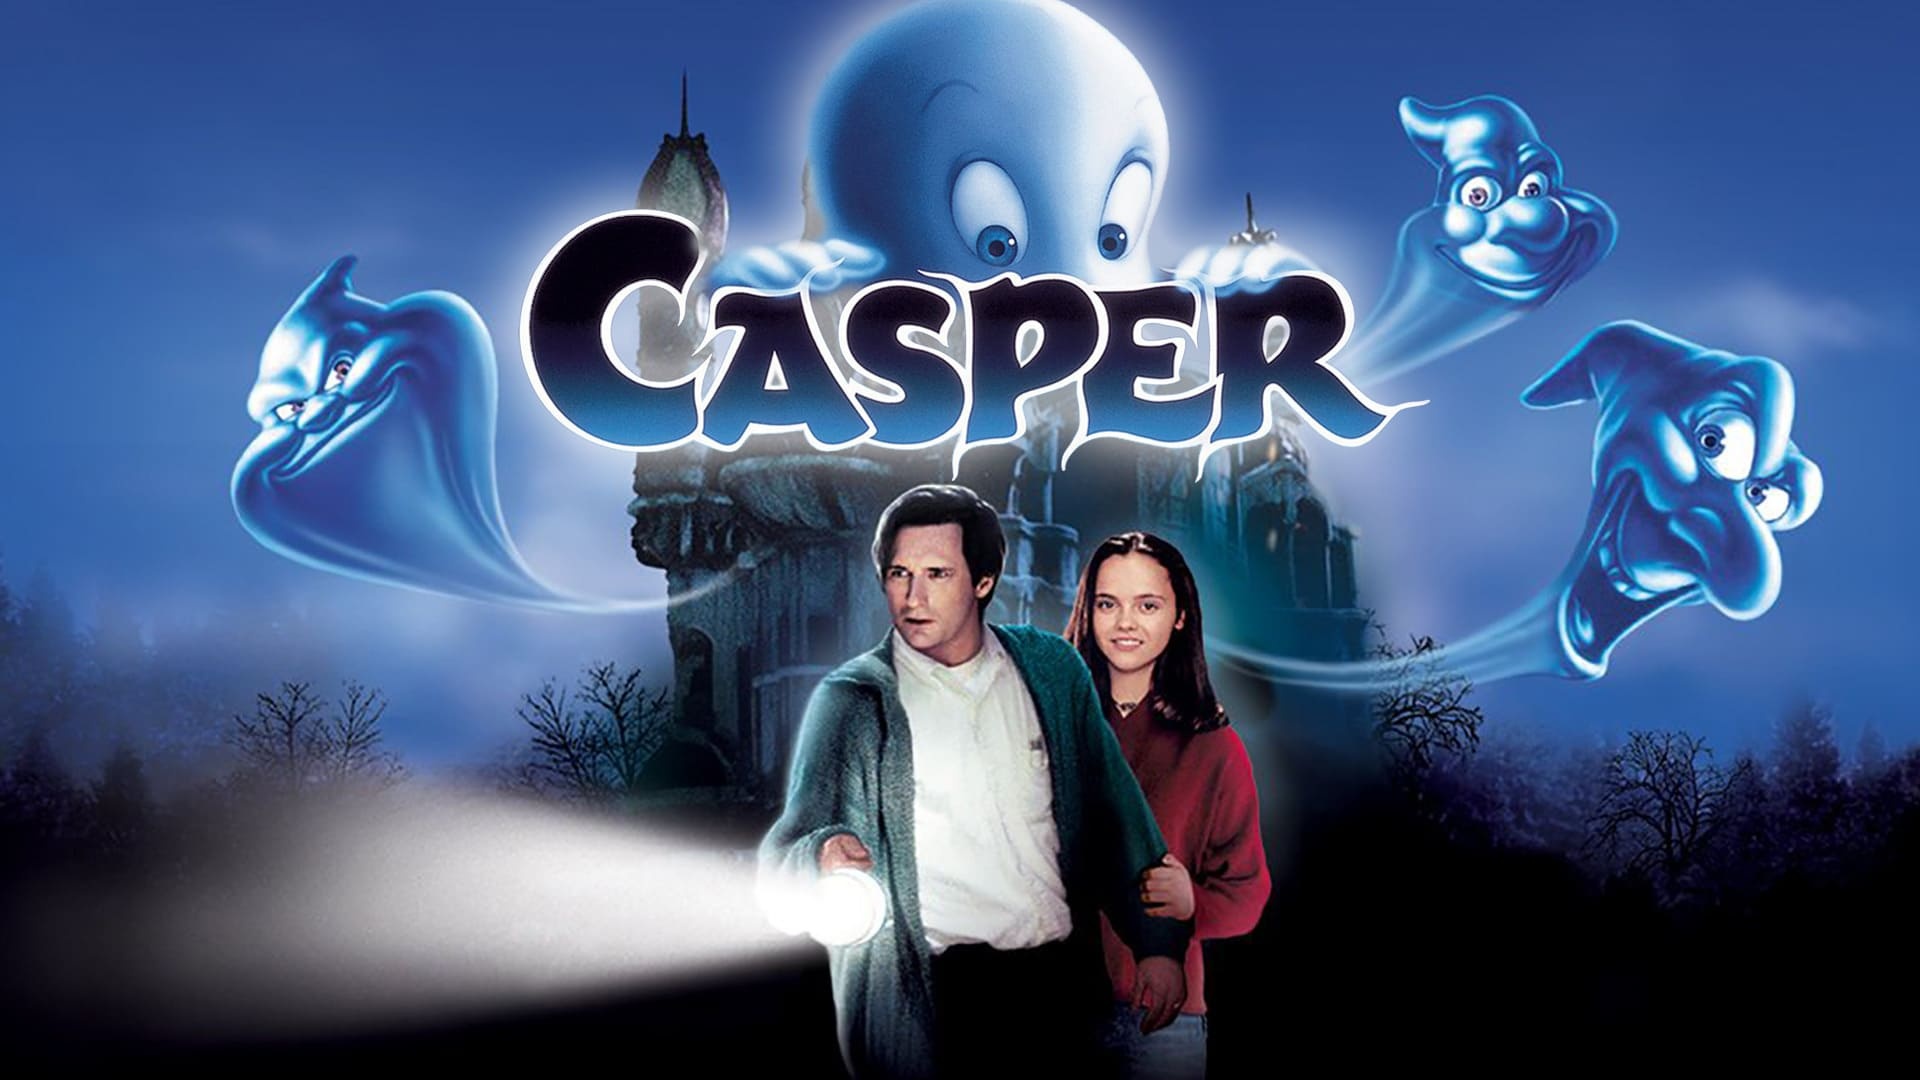 Casper (Movie): An afterlife therapist and his daughter who meet a friendly young ghost. 1920x1080 Full HD Wallpaper.